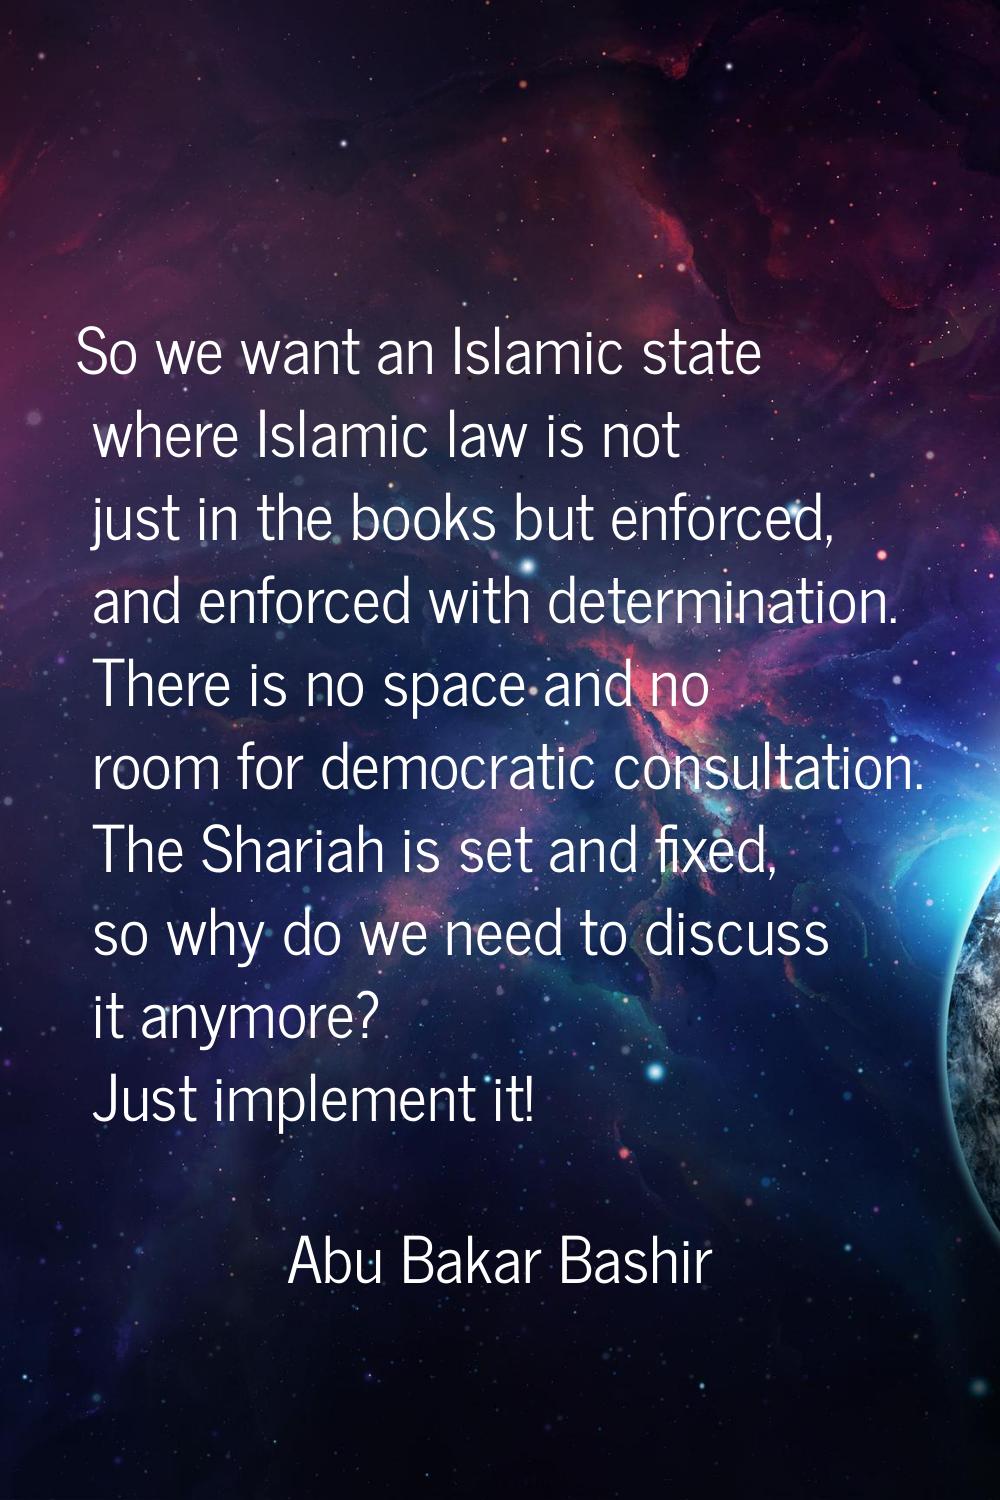 So we want an Islamic state where Islamic law is not just in the books but enforced, and enforced w